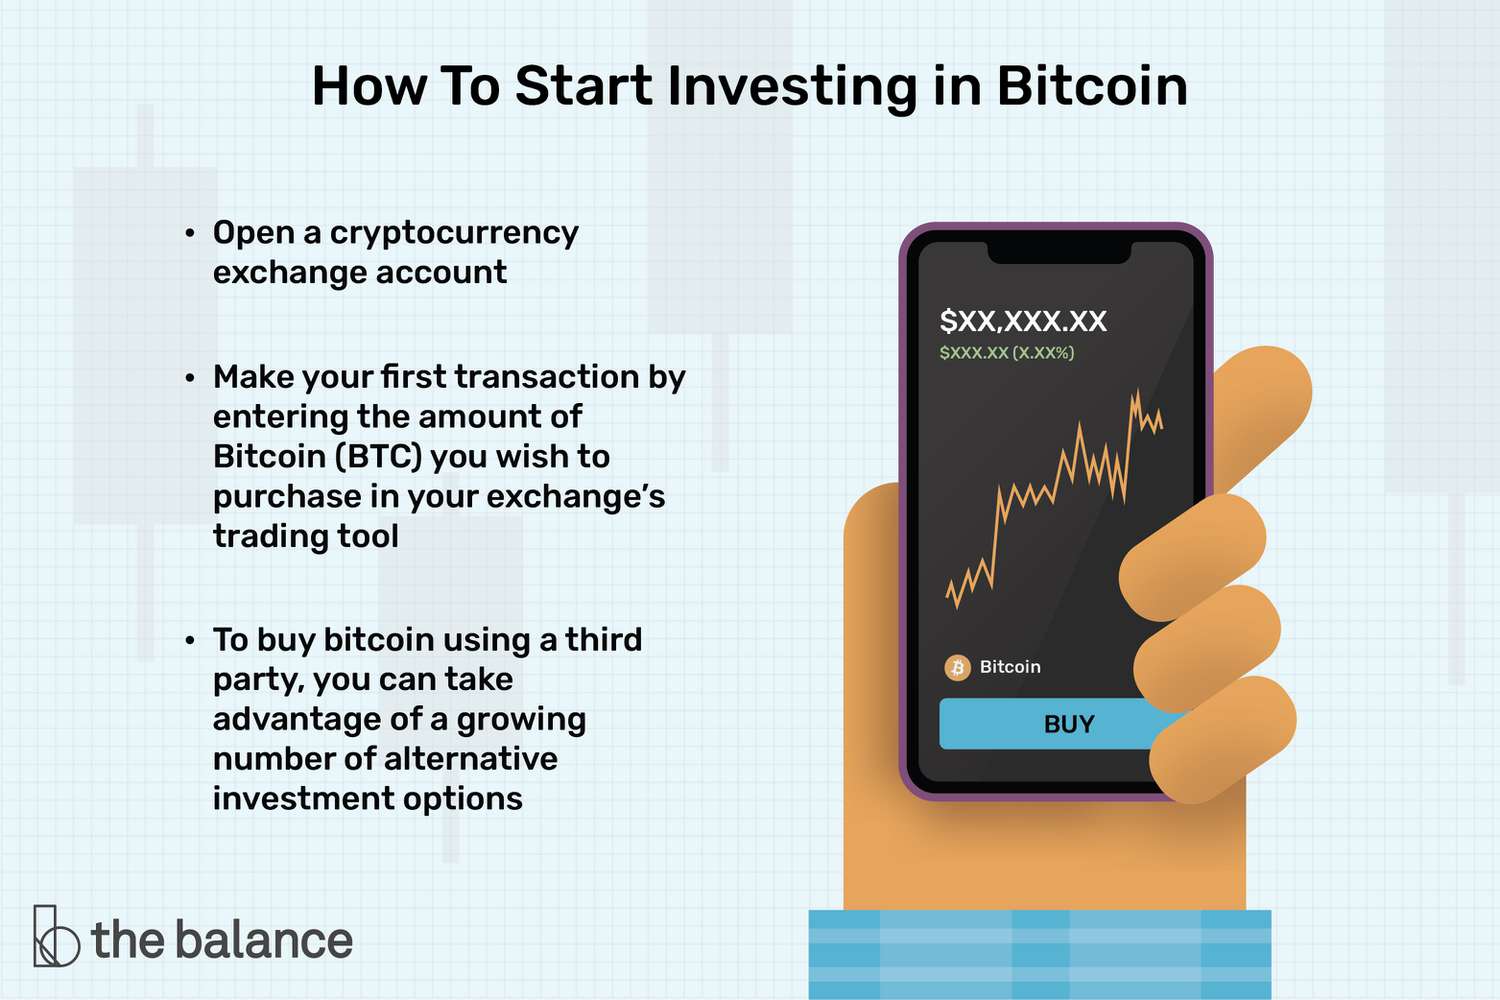 How to Buy Cryptocurrency in Step-by-Step Beginner’s Guide